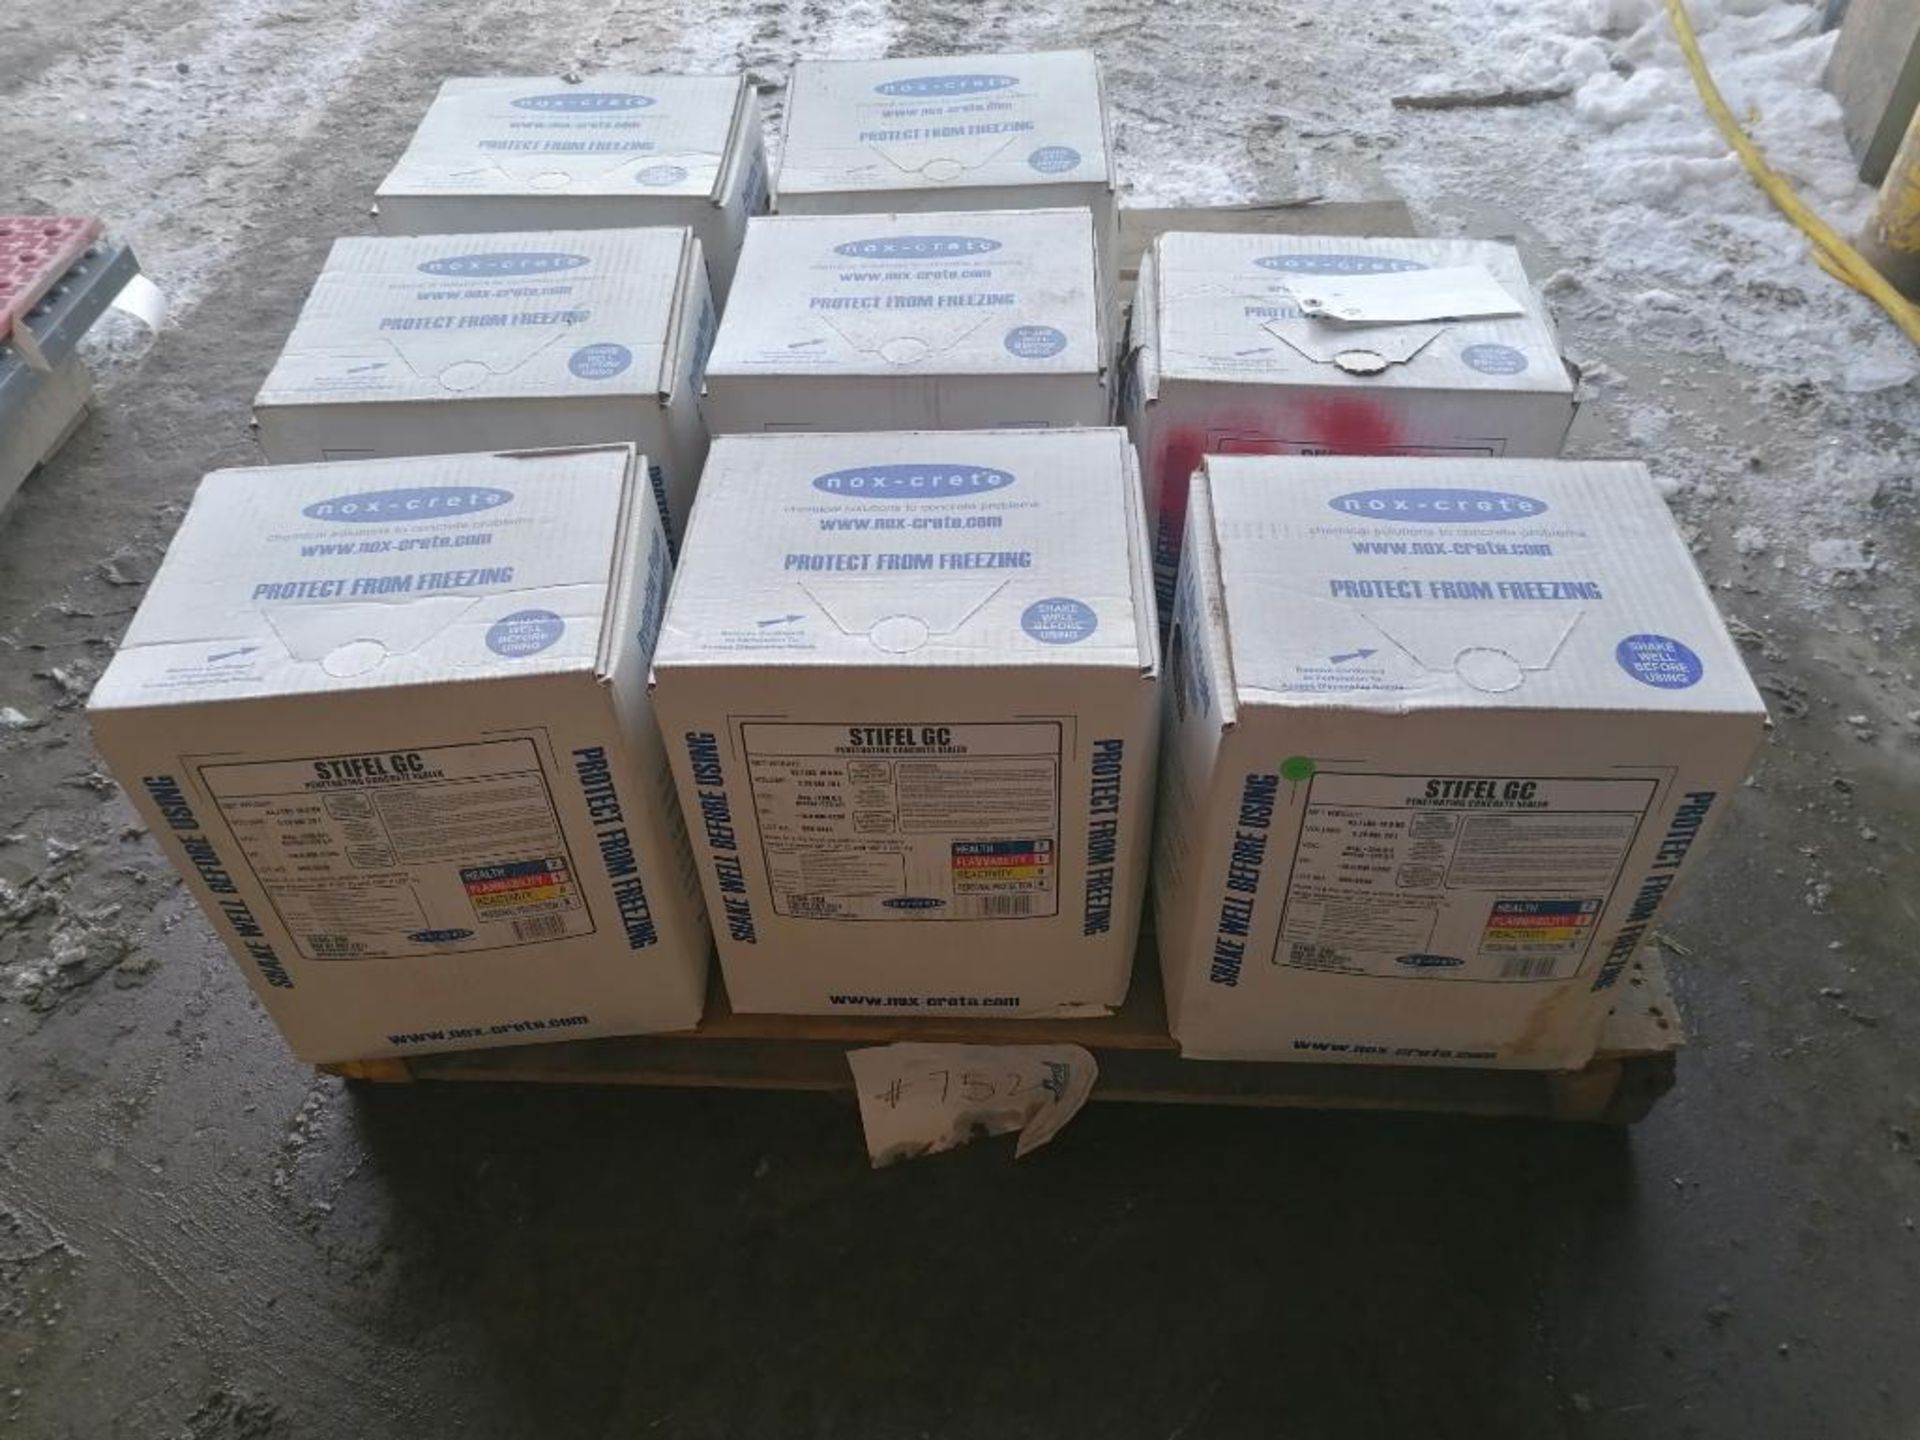 (8) Boxes of STIFEL GC Penetrating Concrete Sealer. Located in Des Moines, IA.